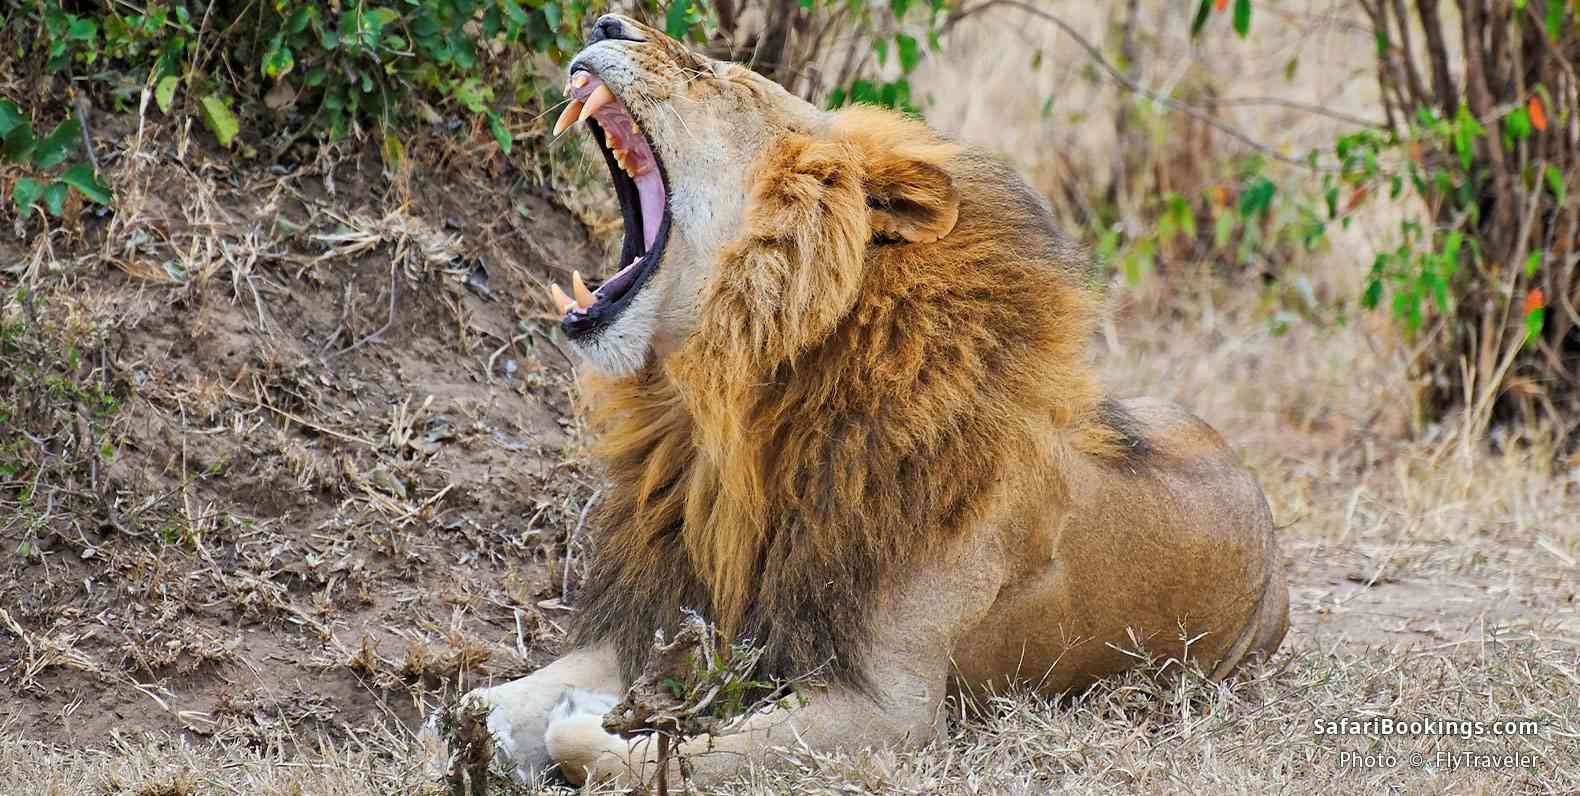 Lion yawning in Ol Kinyei Conservancy